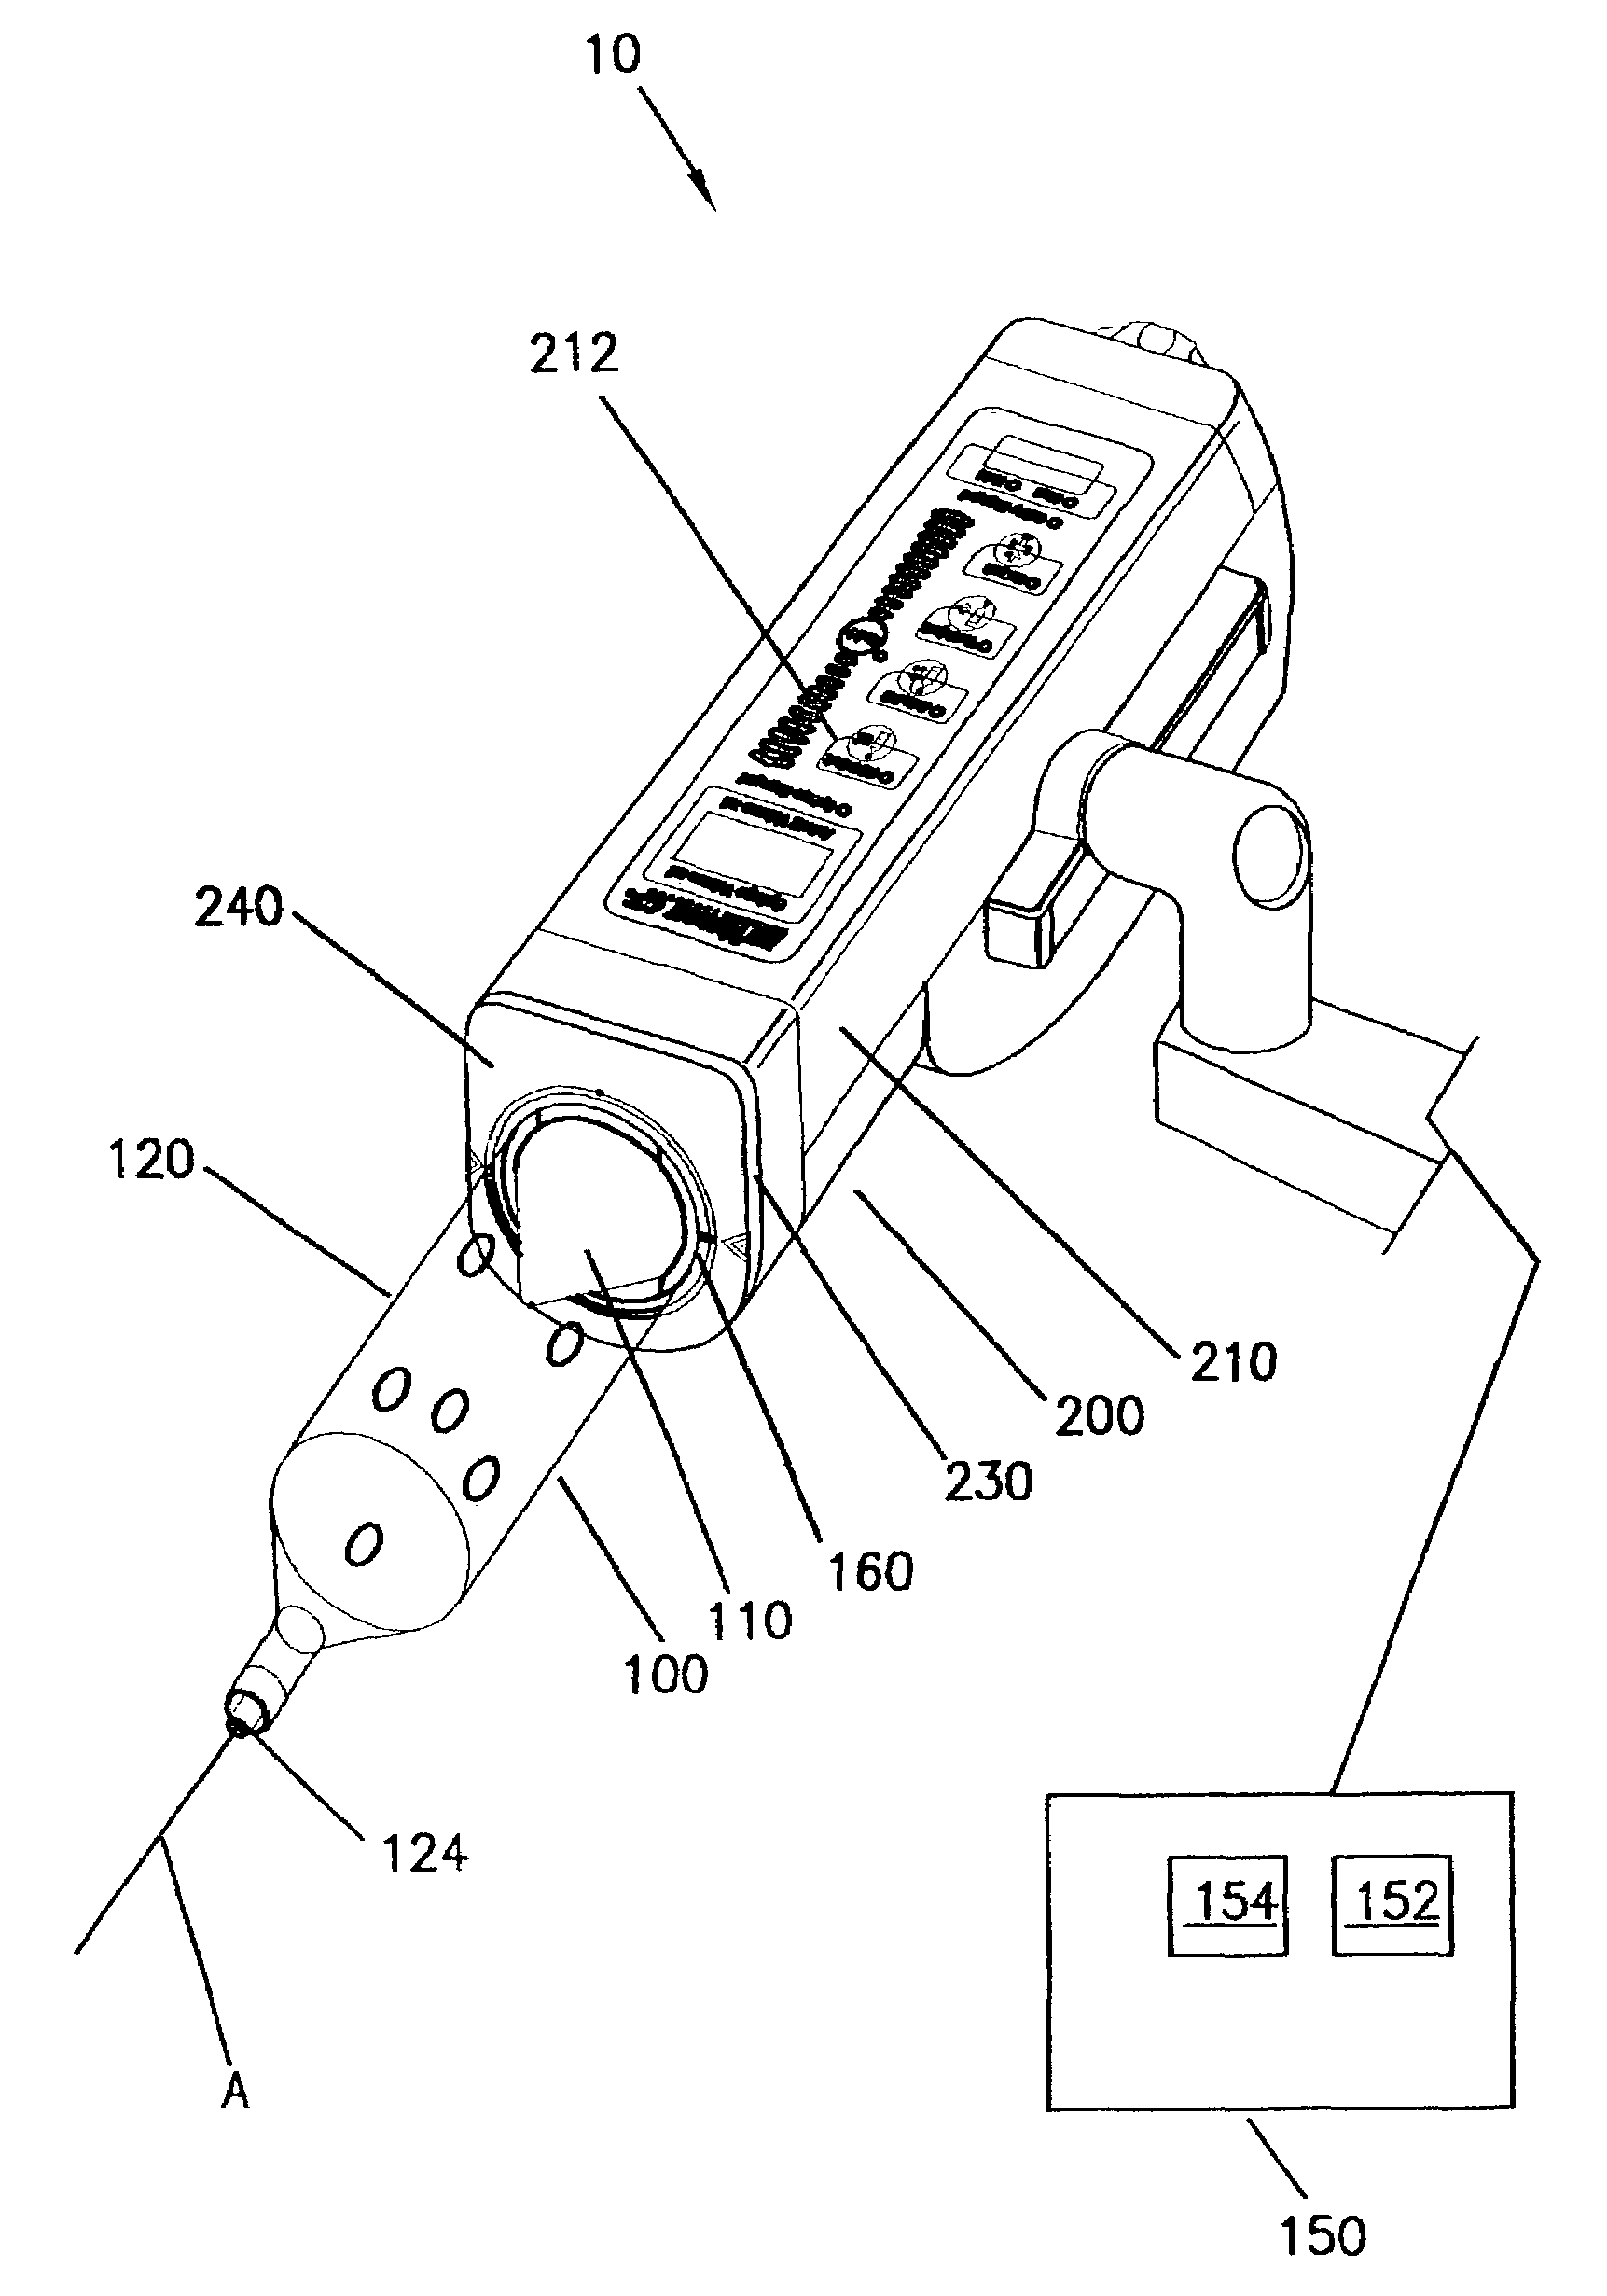 Injector system including an injector drive member that automatically advances and engages a syringe plunger